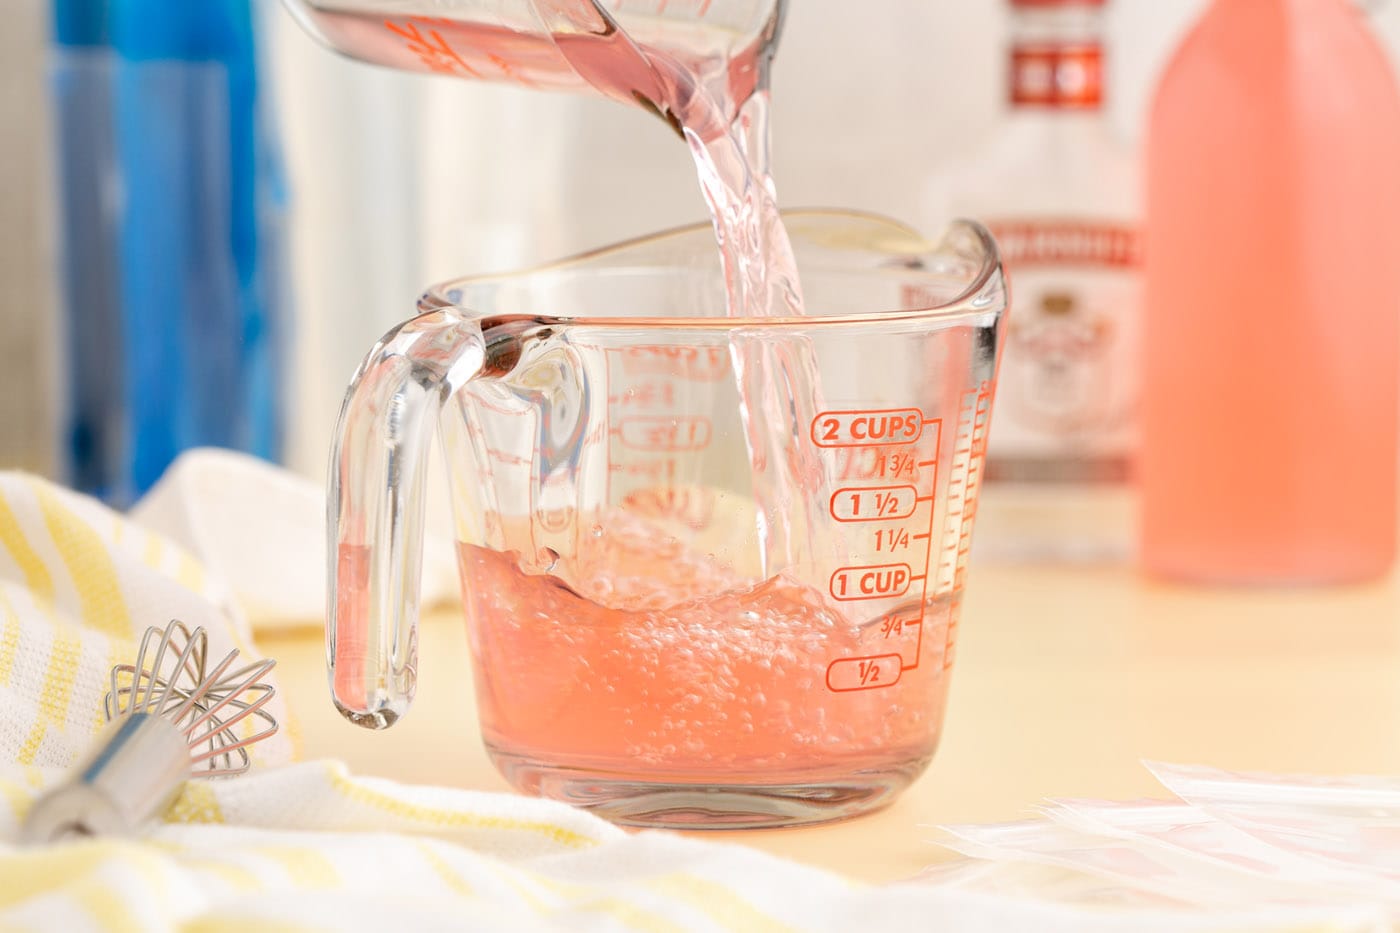 pouring juice into a measuring cup with vodka